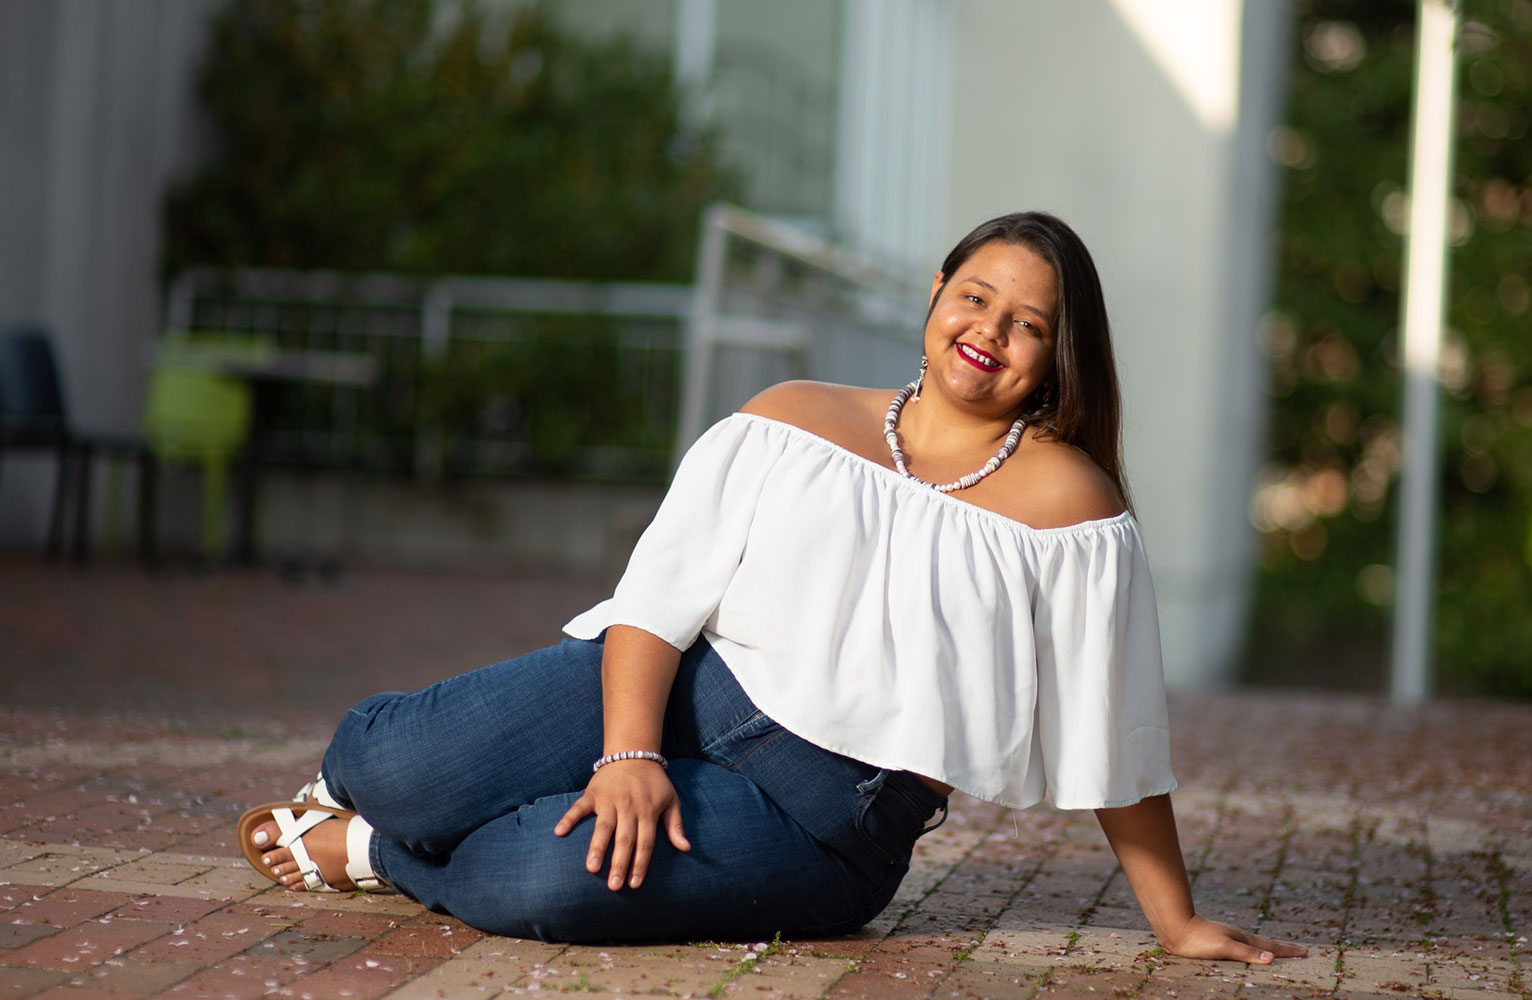 Mikayah Locklear poses sitting on the ground outside